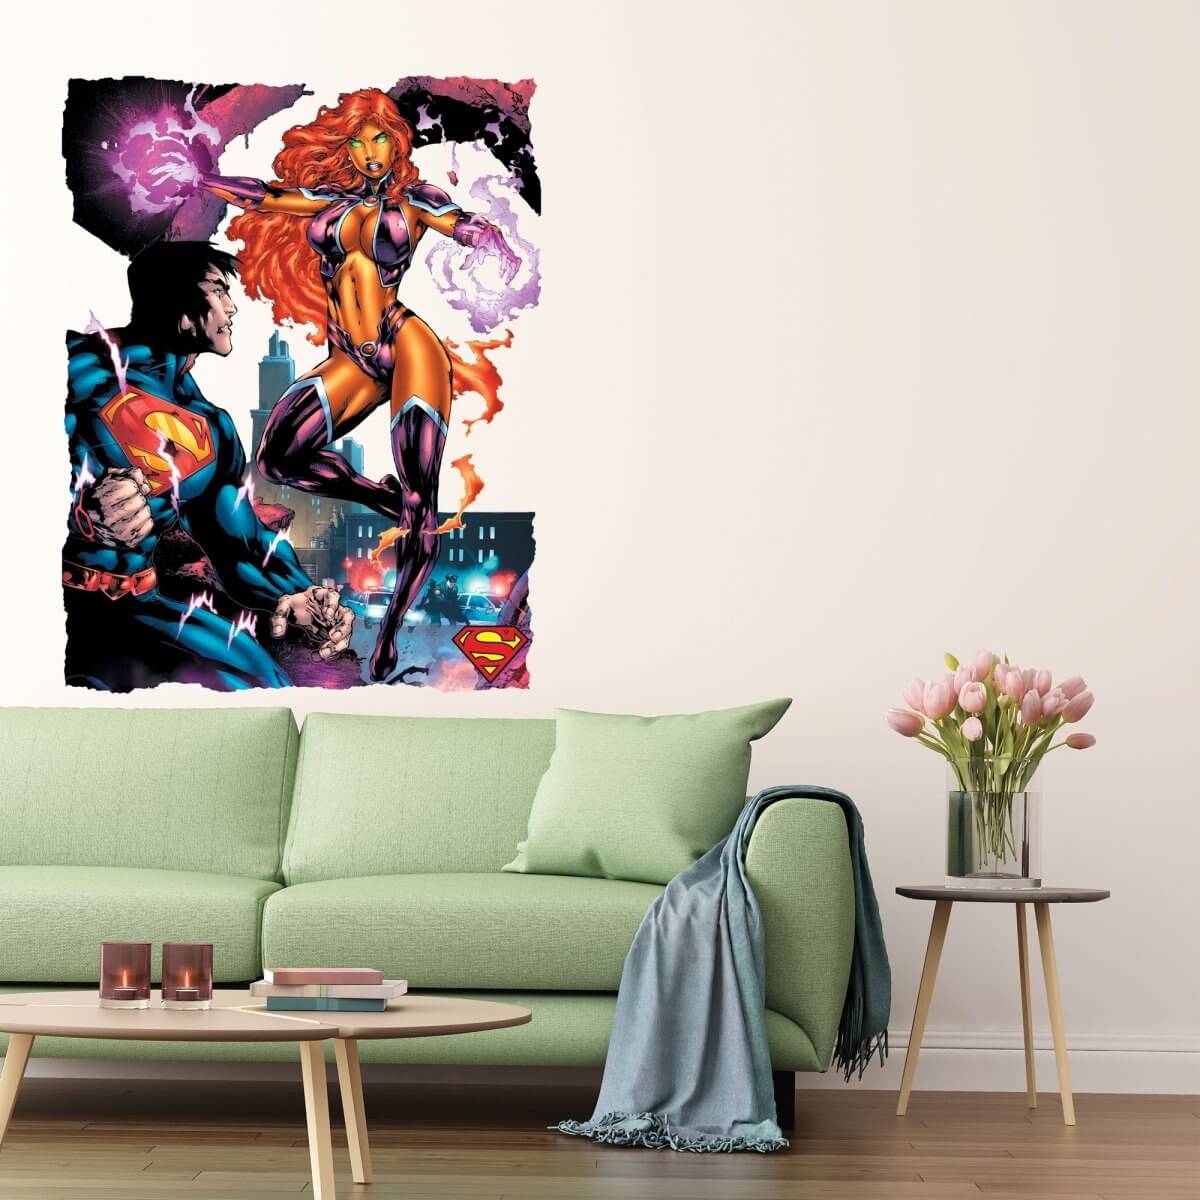 Kismet Decals New 52 Superman #29 Pg. 2 Comic Cover Series Licensed Wall Sticker - Easy DIY Home & Room Decor Wall Art - Kismet Decals